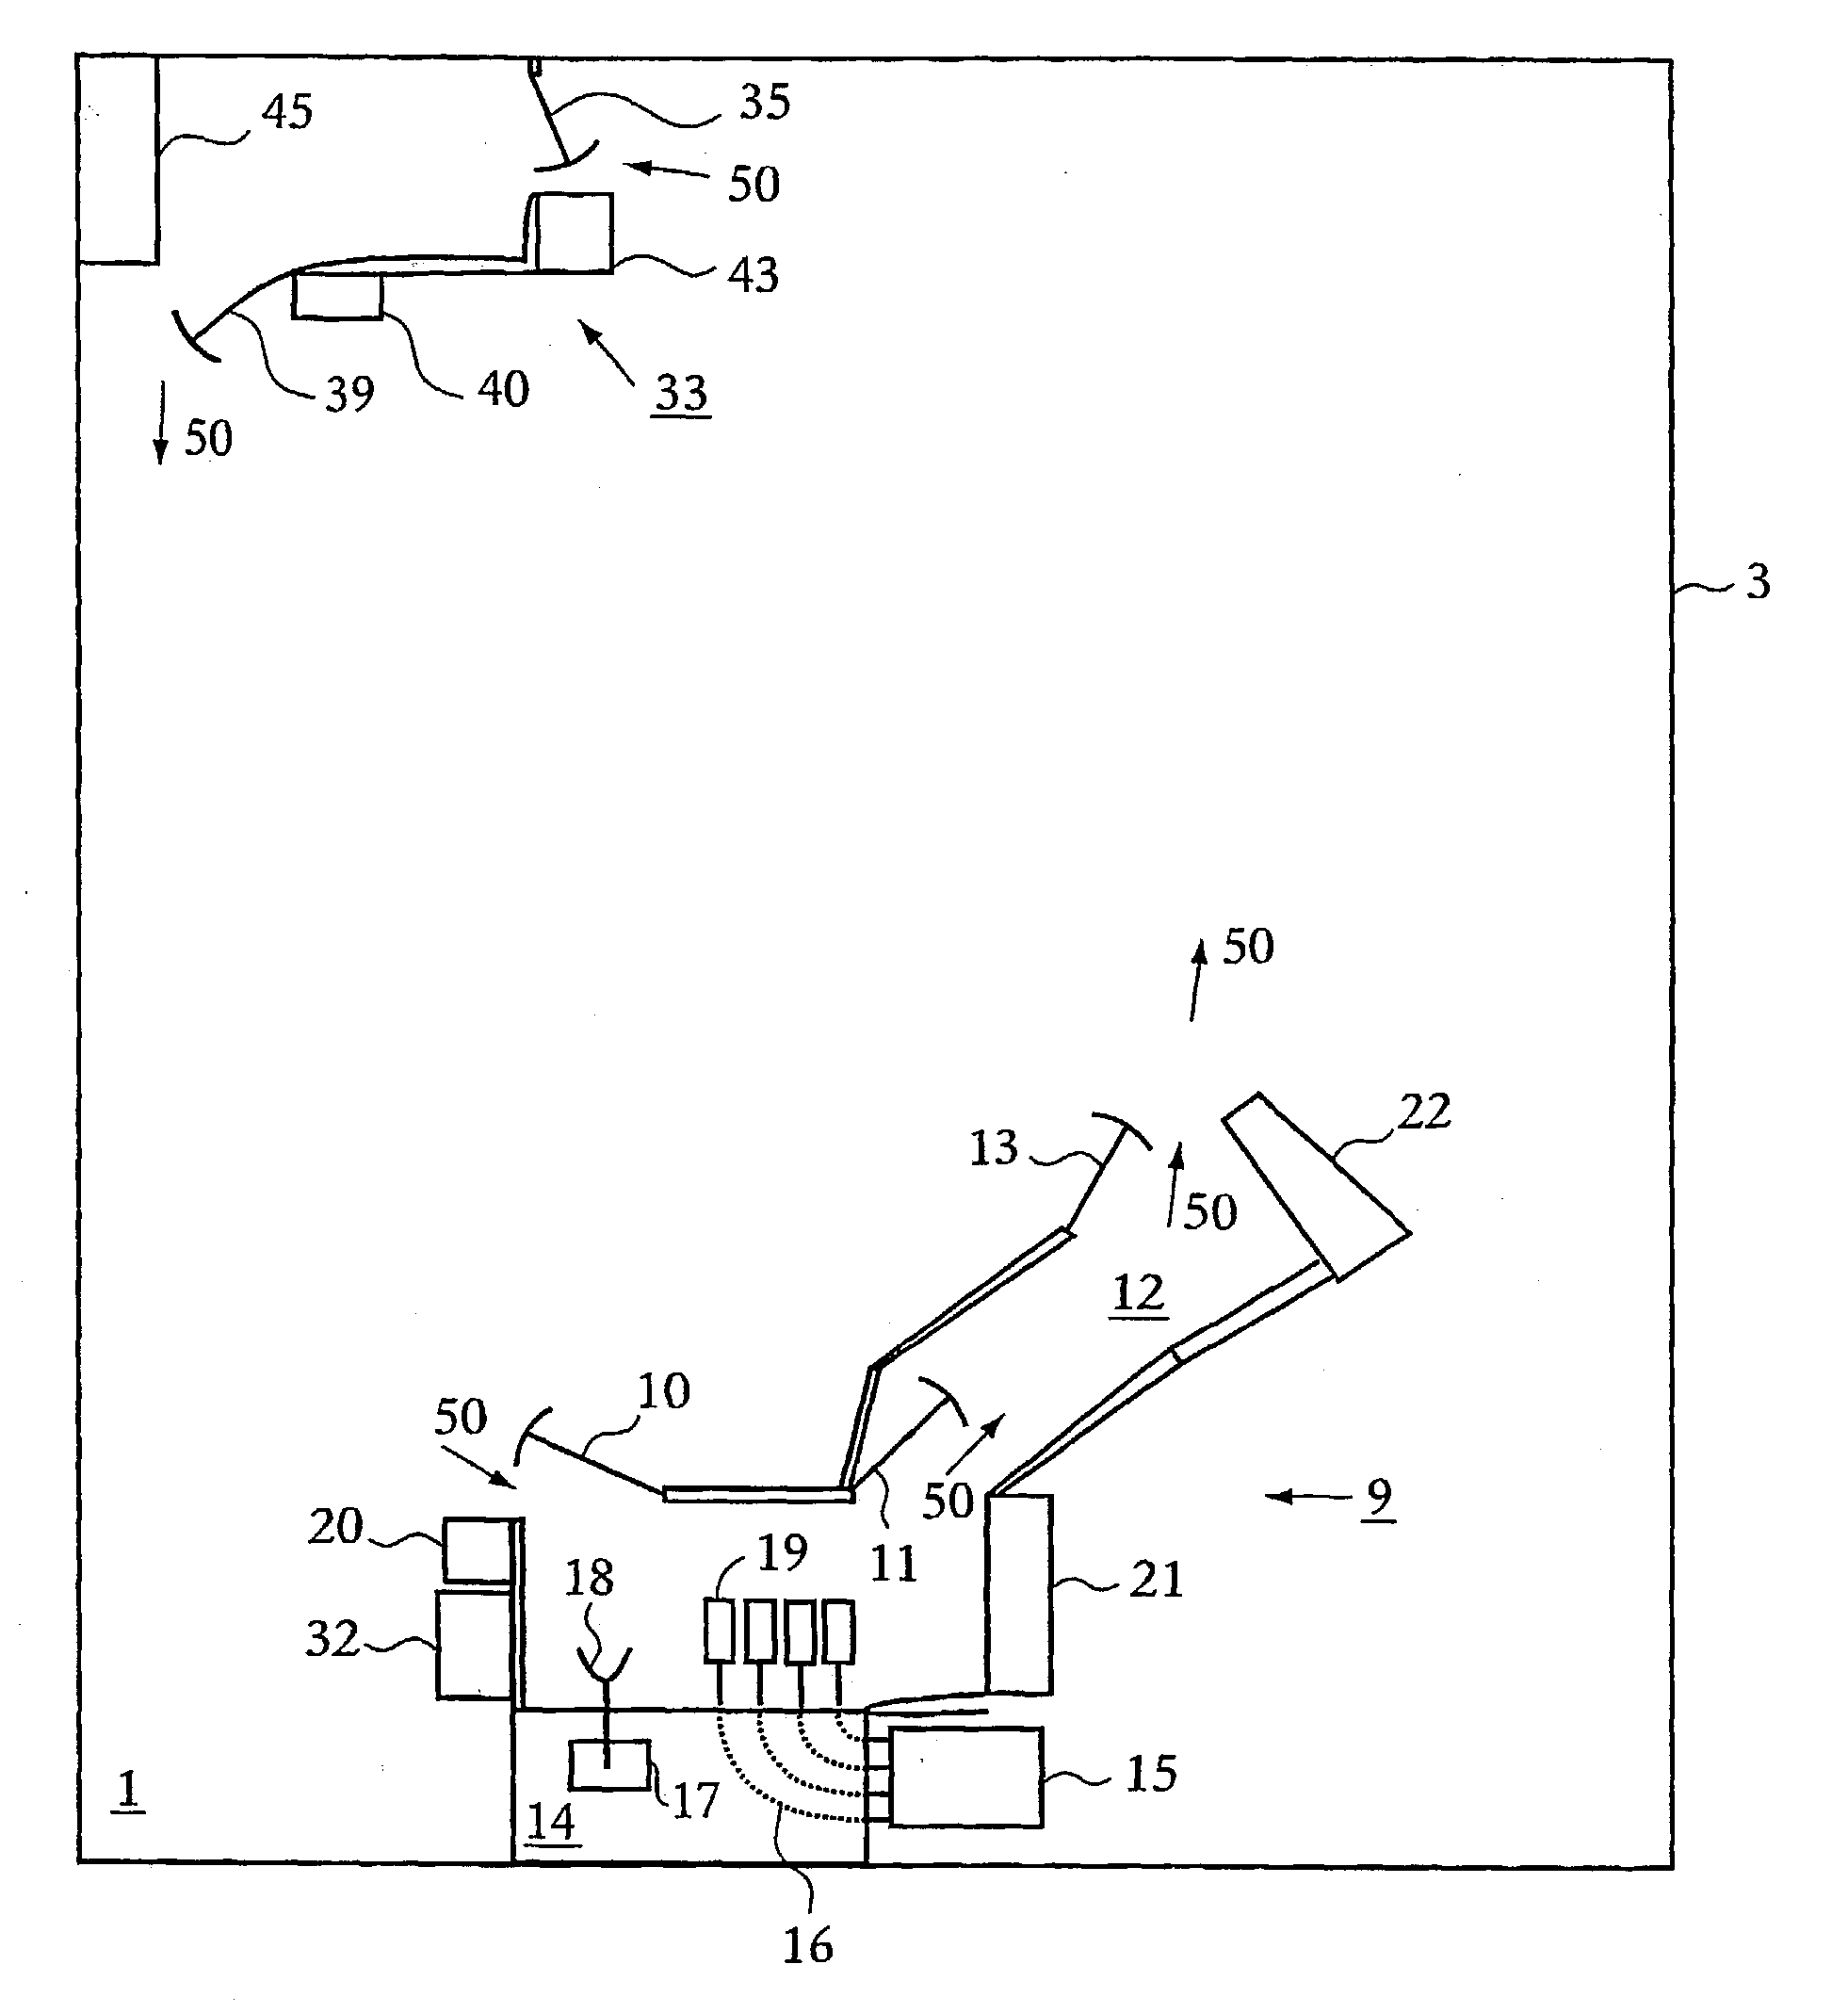 Method of miling and milking parlor